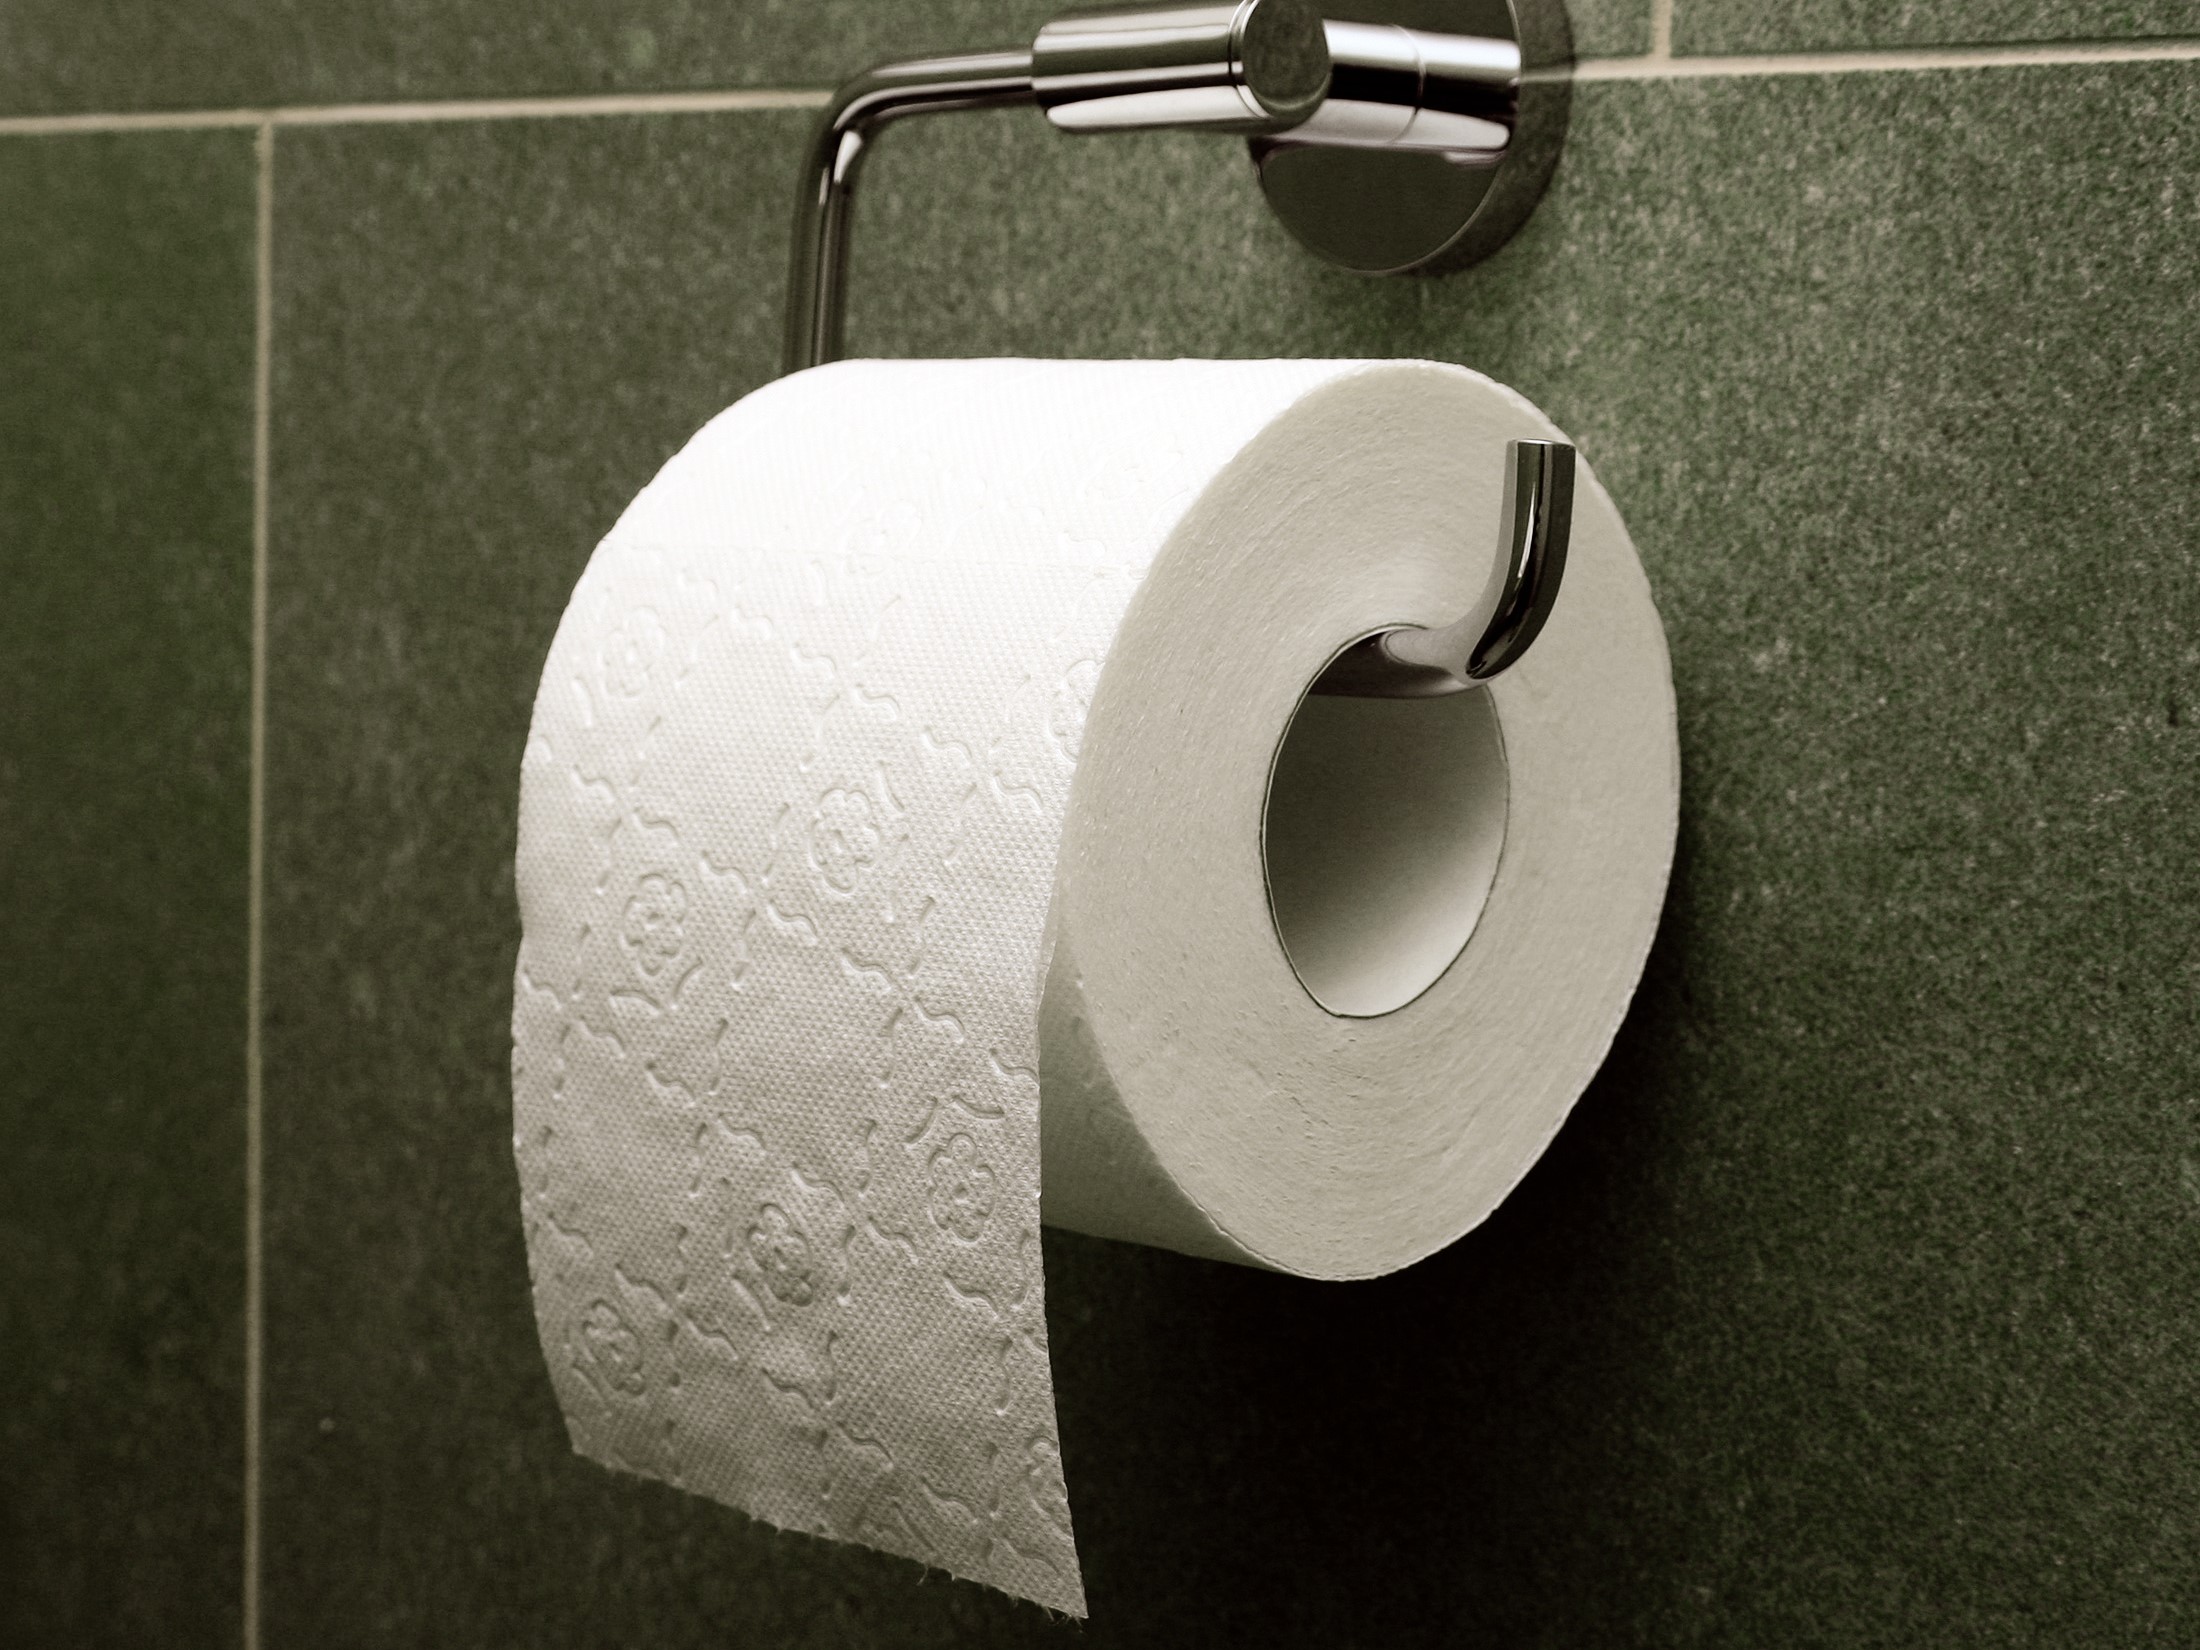 Why Are People Hoarding Toilet Paper?